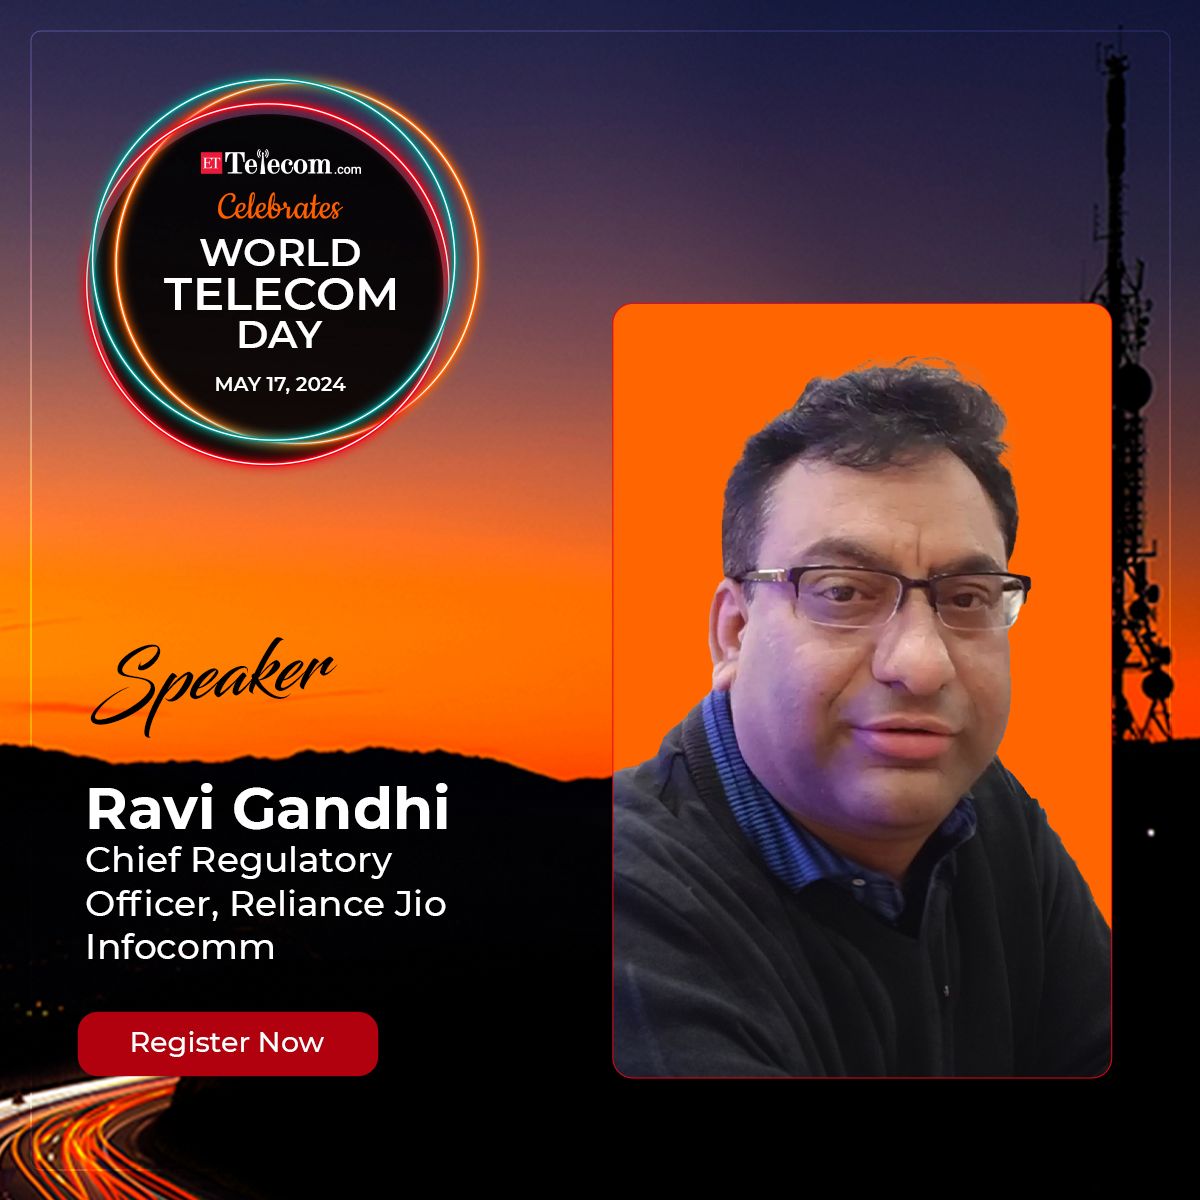 #SpeakerAnnouncement

Join us at ETTelecom's virtual event on May 17, 2024, as we unveil our speaker @rpgandhi, Chief Regulatory Officer, Reliance Jio Infocomm. 

Learn more: bit.ly/3WyxcCO

#ETTelecom #ETWorldtelecom